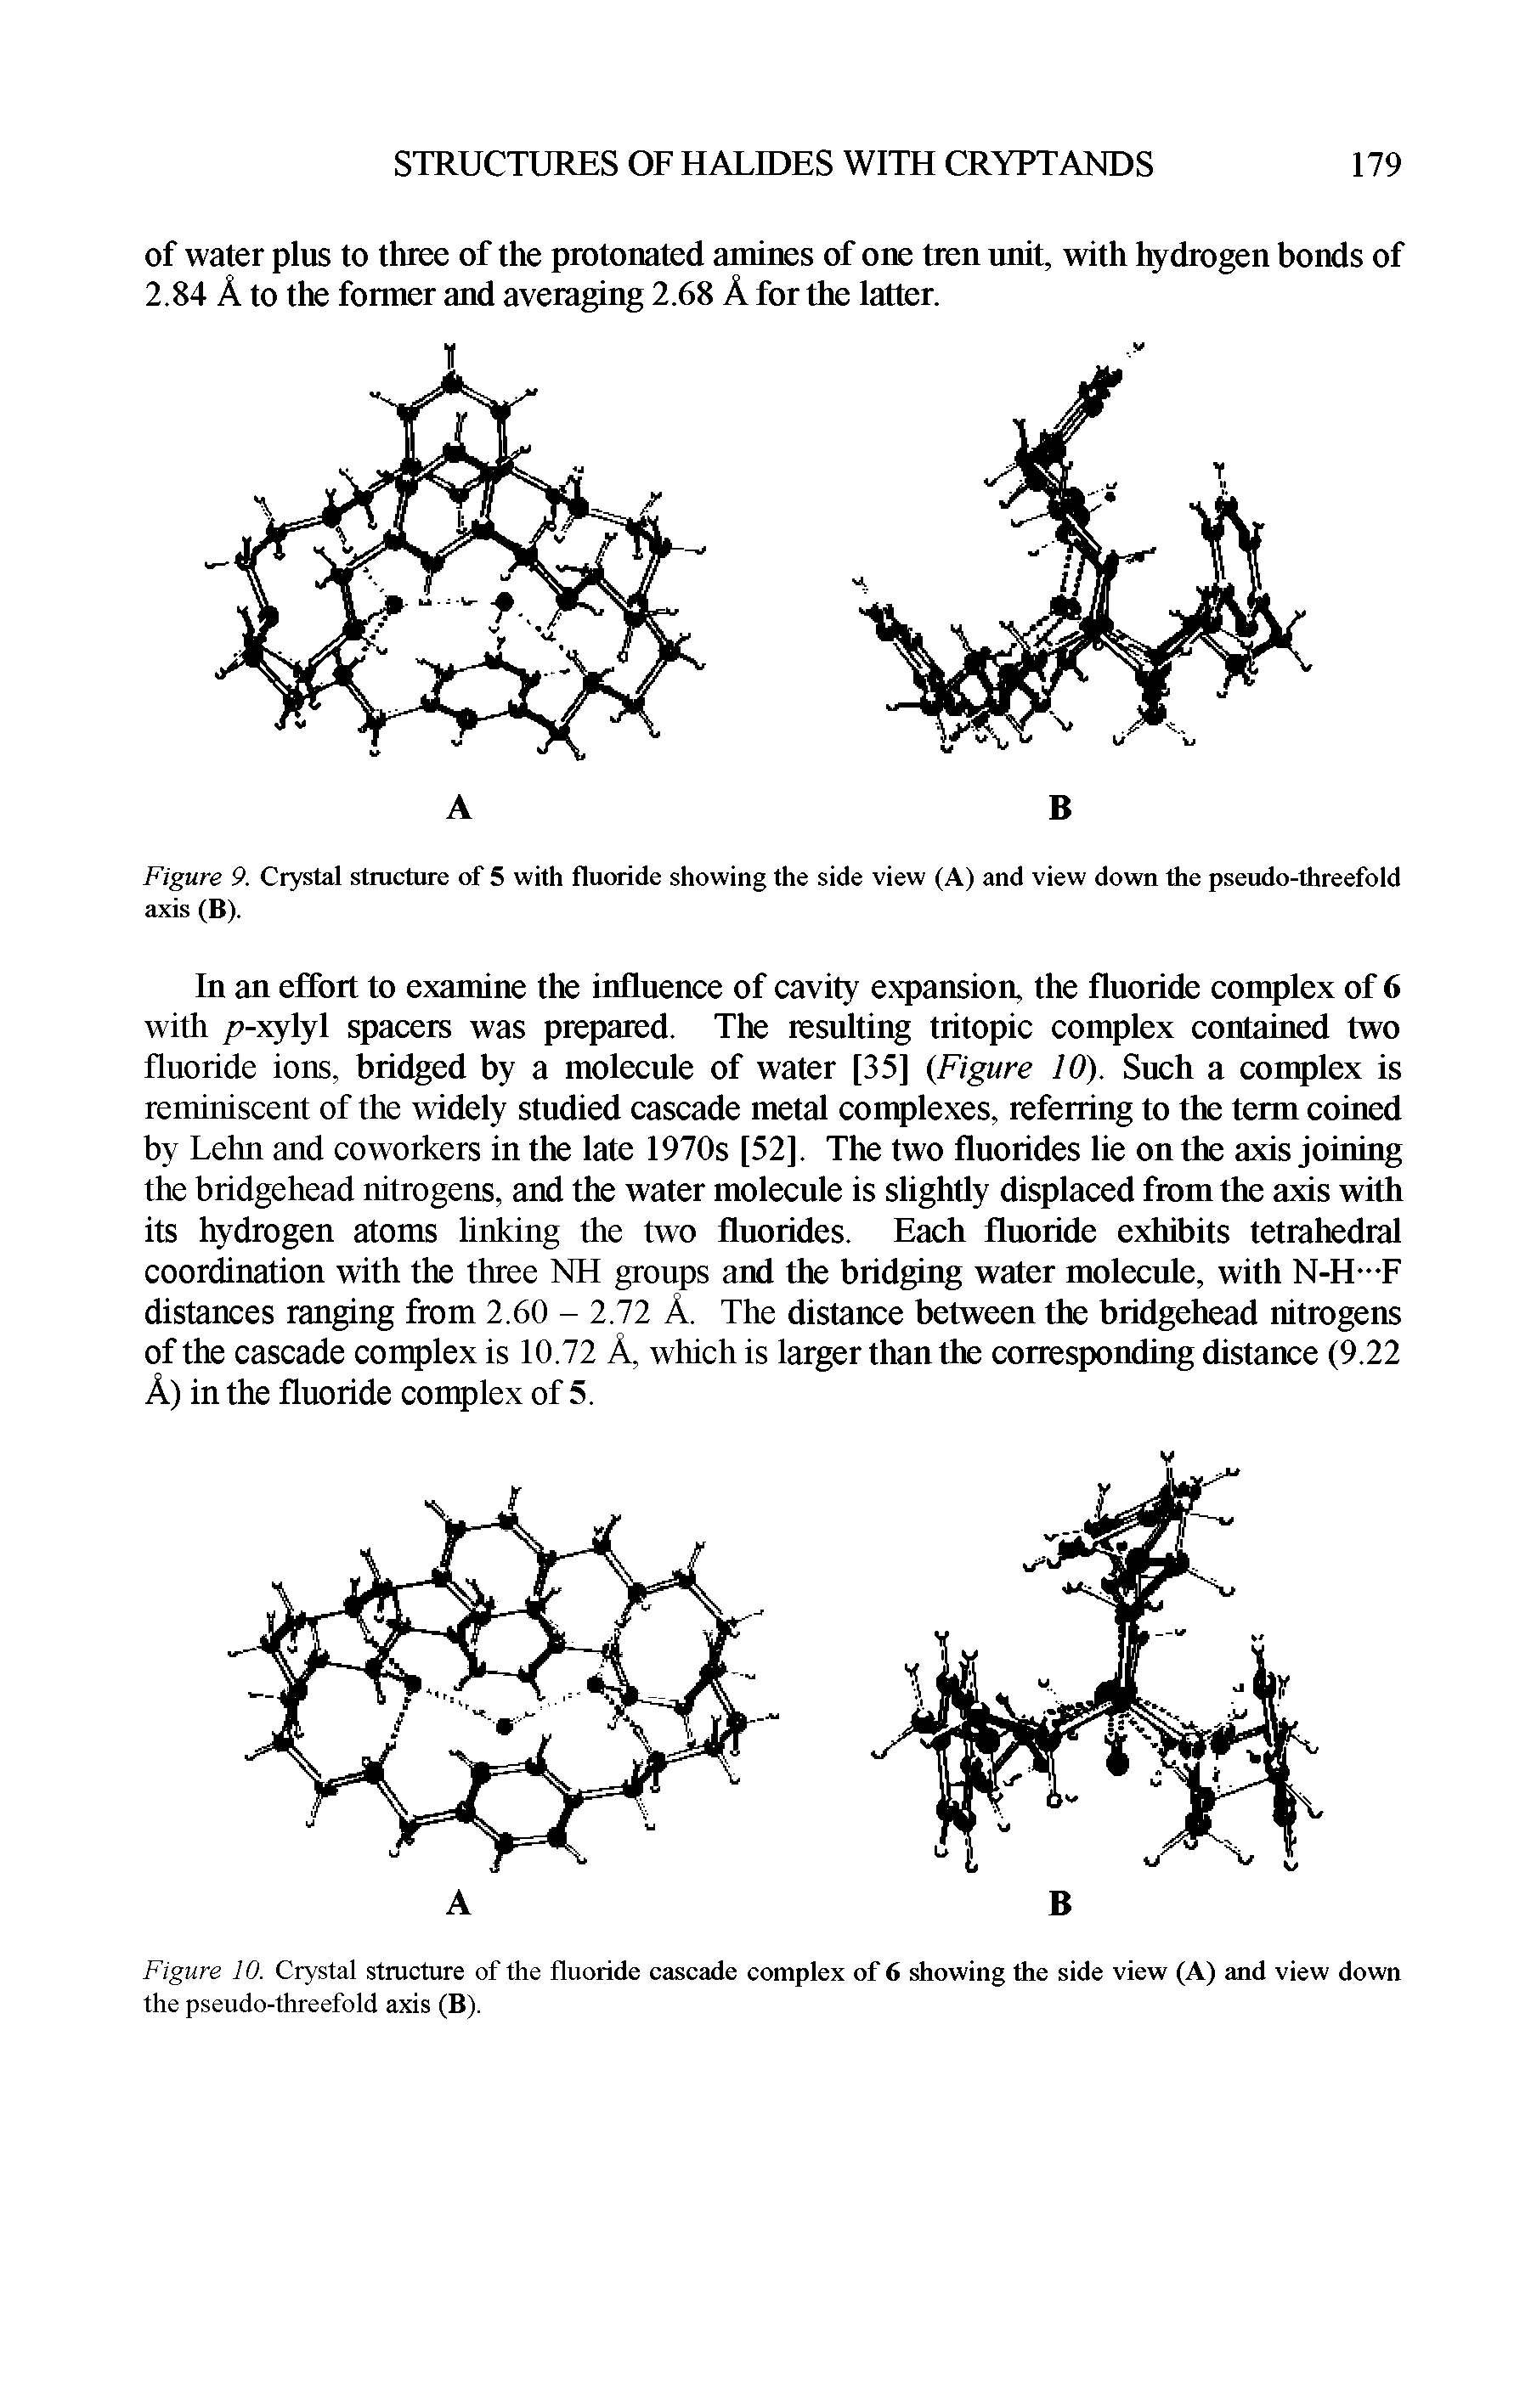 Figure 10. Crystal structure of the fluoride cascade complex of 6 showing die side view (A) and view down the pseudo-threefold axis (B).